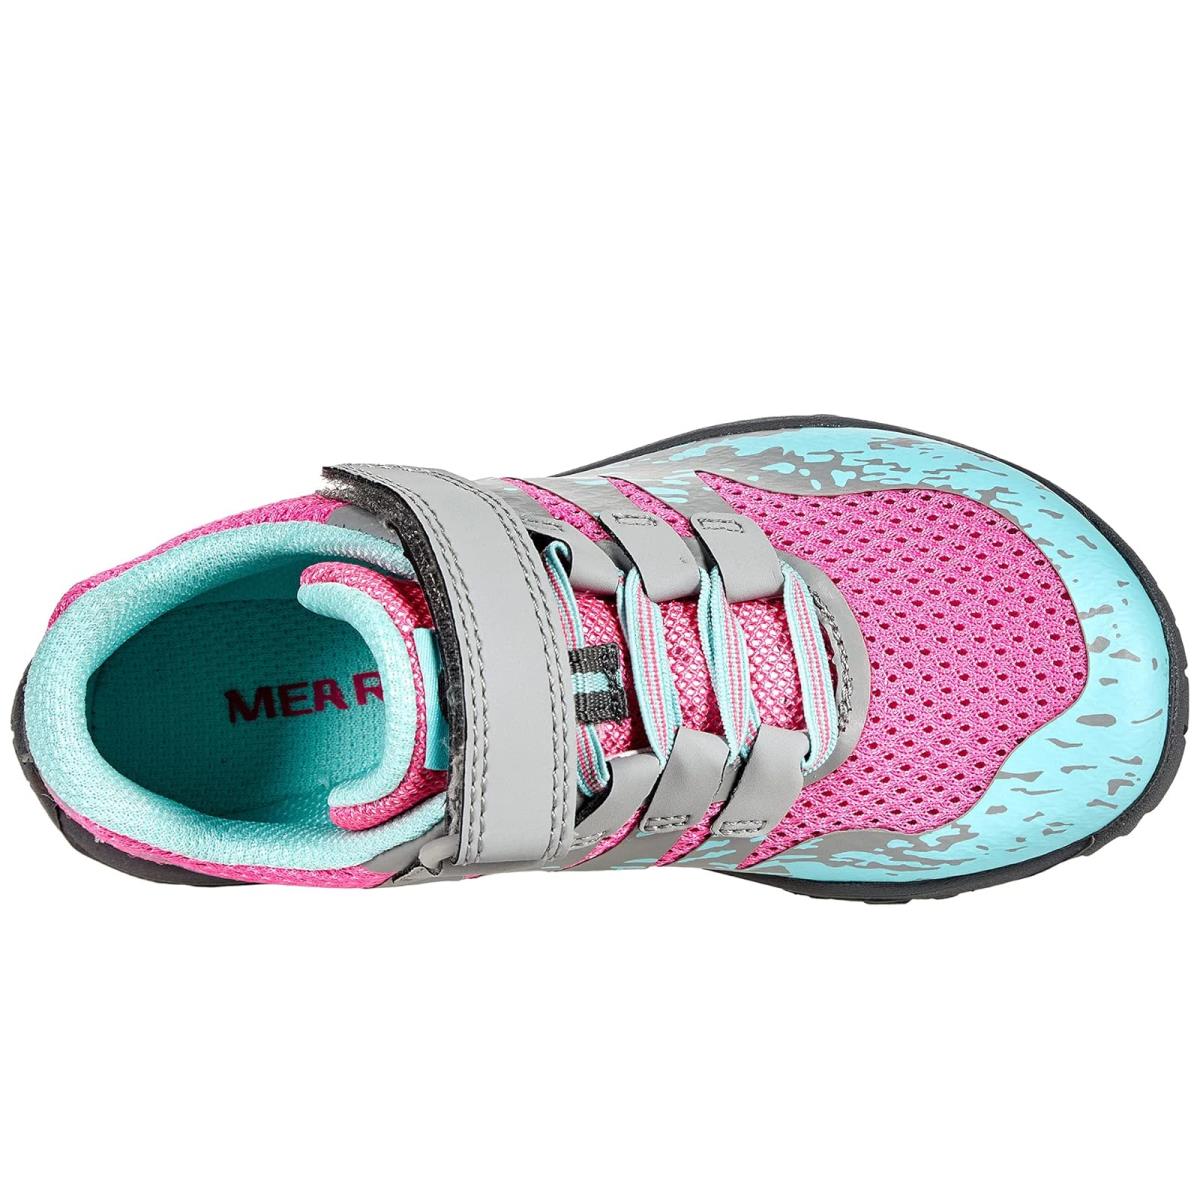 Girl`s Shoes Merrell Kids Trail Glove 5 A/c Toddler/little Kid/big Kid - Grey/Hot Pink/Turquoise